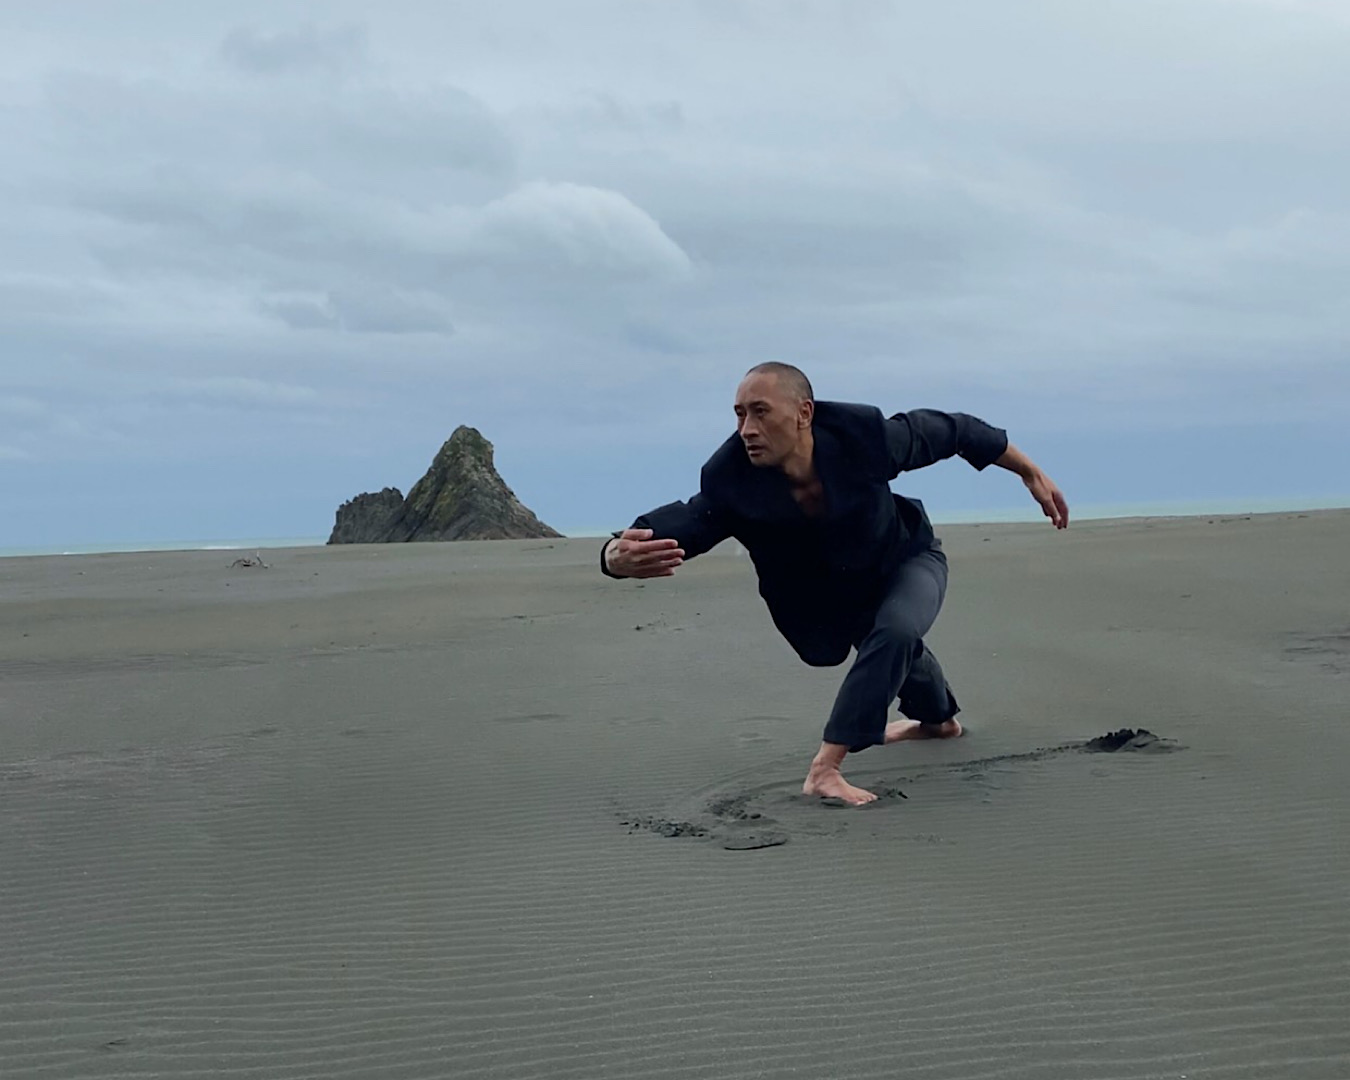 Renowned choreographer and dancer Taane Mete performs Pōhutukawa, a work he created especially for Matariki, on a beach.